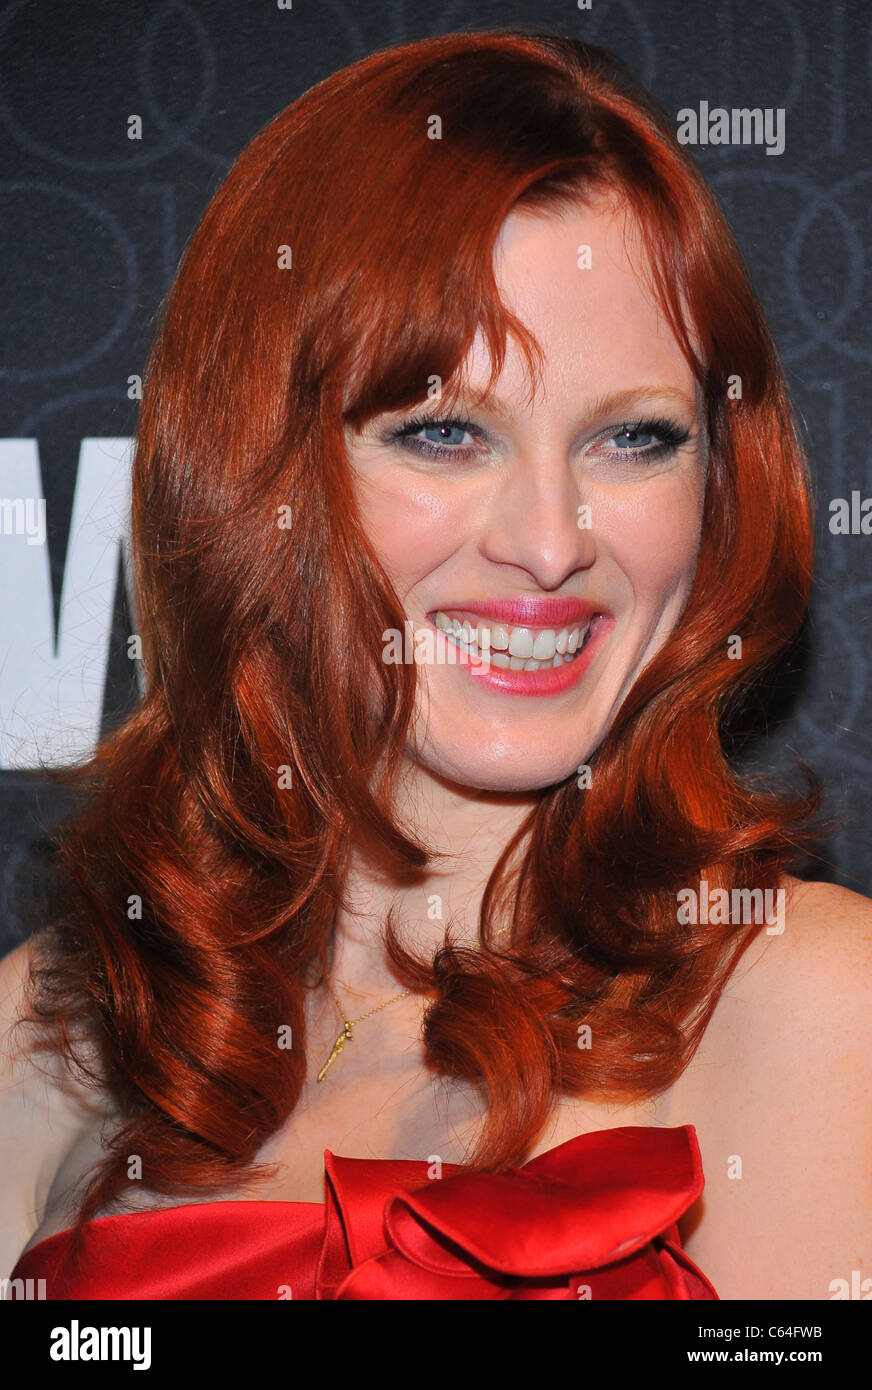 Karen Elson at arrivals for Women's Wear Daily (WWD) 100th Anniversary Gala, Cipriani Restaurant 42nd Street, New York, NY November 2, 2010. Photo By: Gregorio T. Binuya/Everett Collection Stock Photo